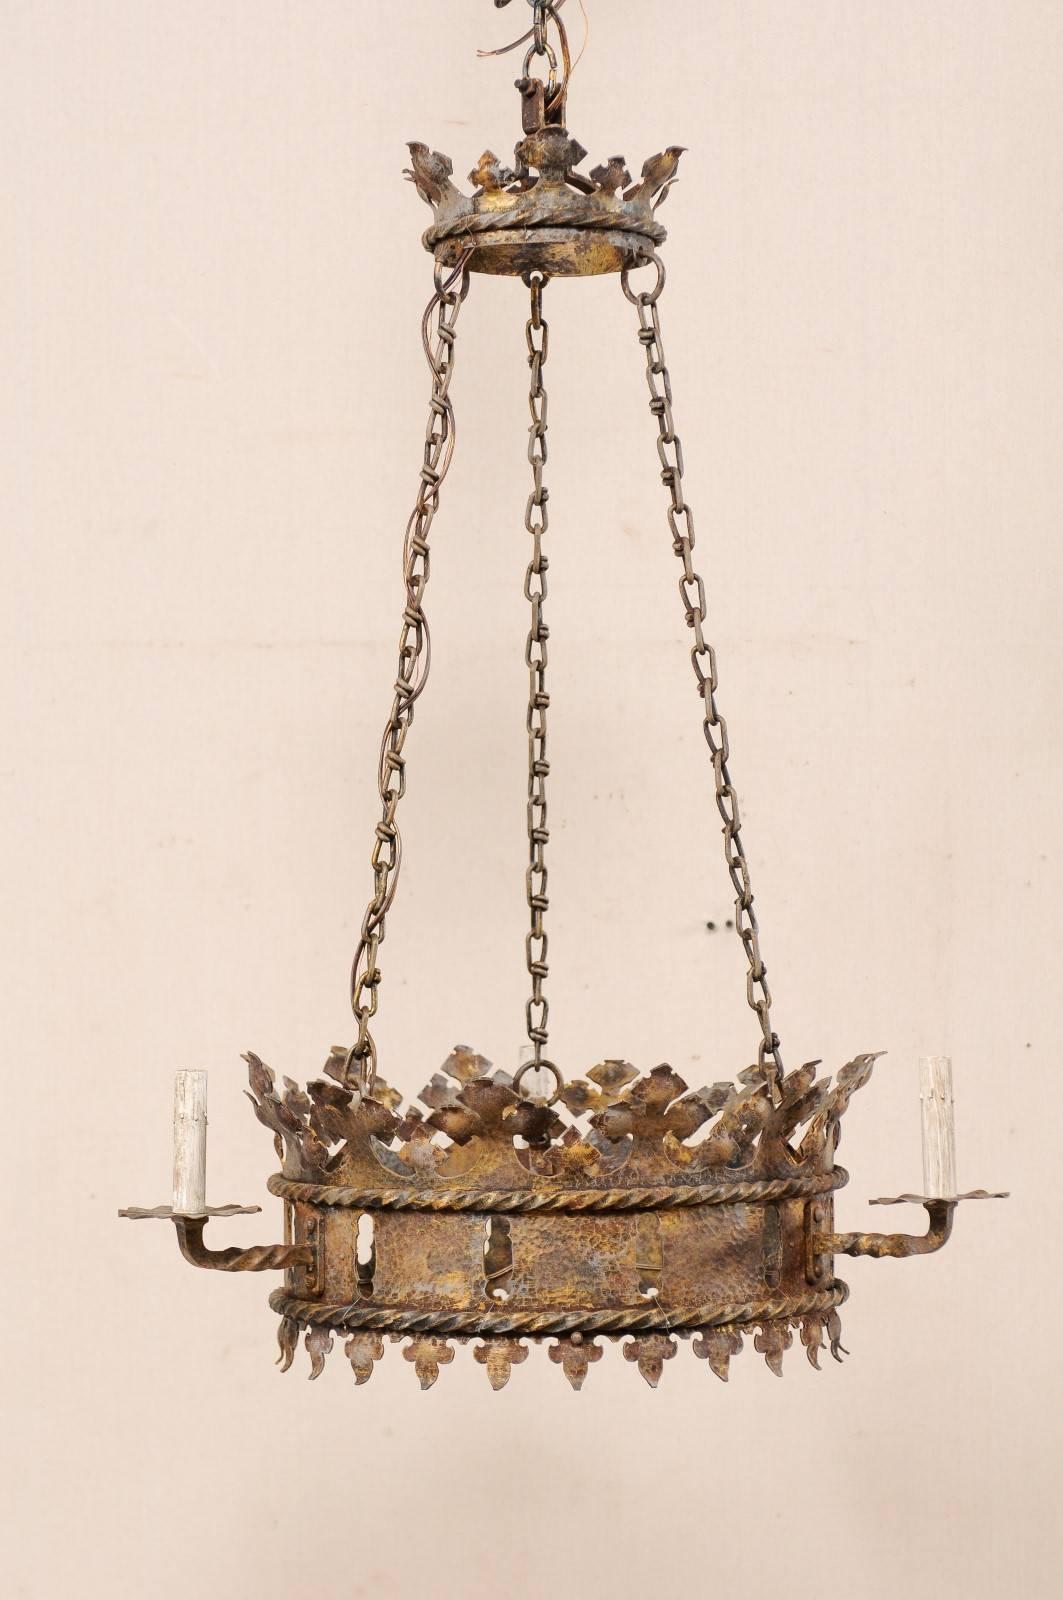 A French midcentury ring-shaped iron three-light chandelier. This elegant French chandelier from the mid-20th century features an open circular base, which resembles that of a crown, has been elaborately stylized with piercings, roped-trimmings,